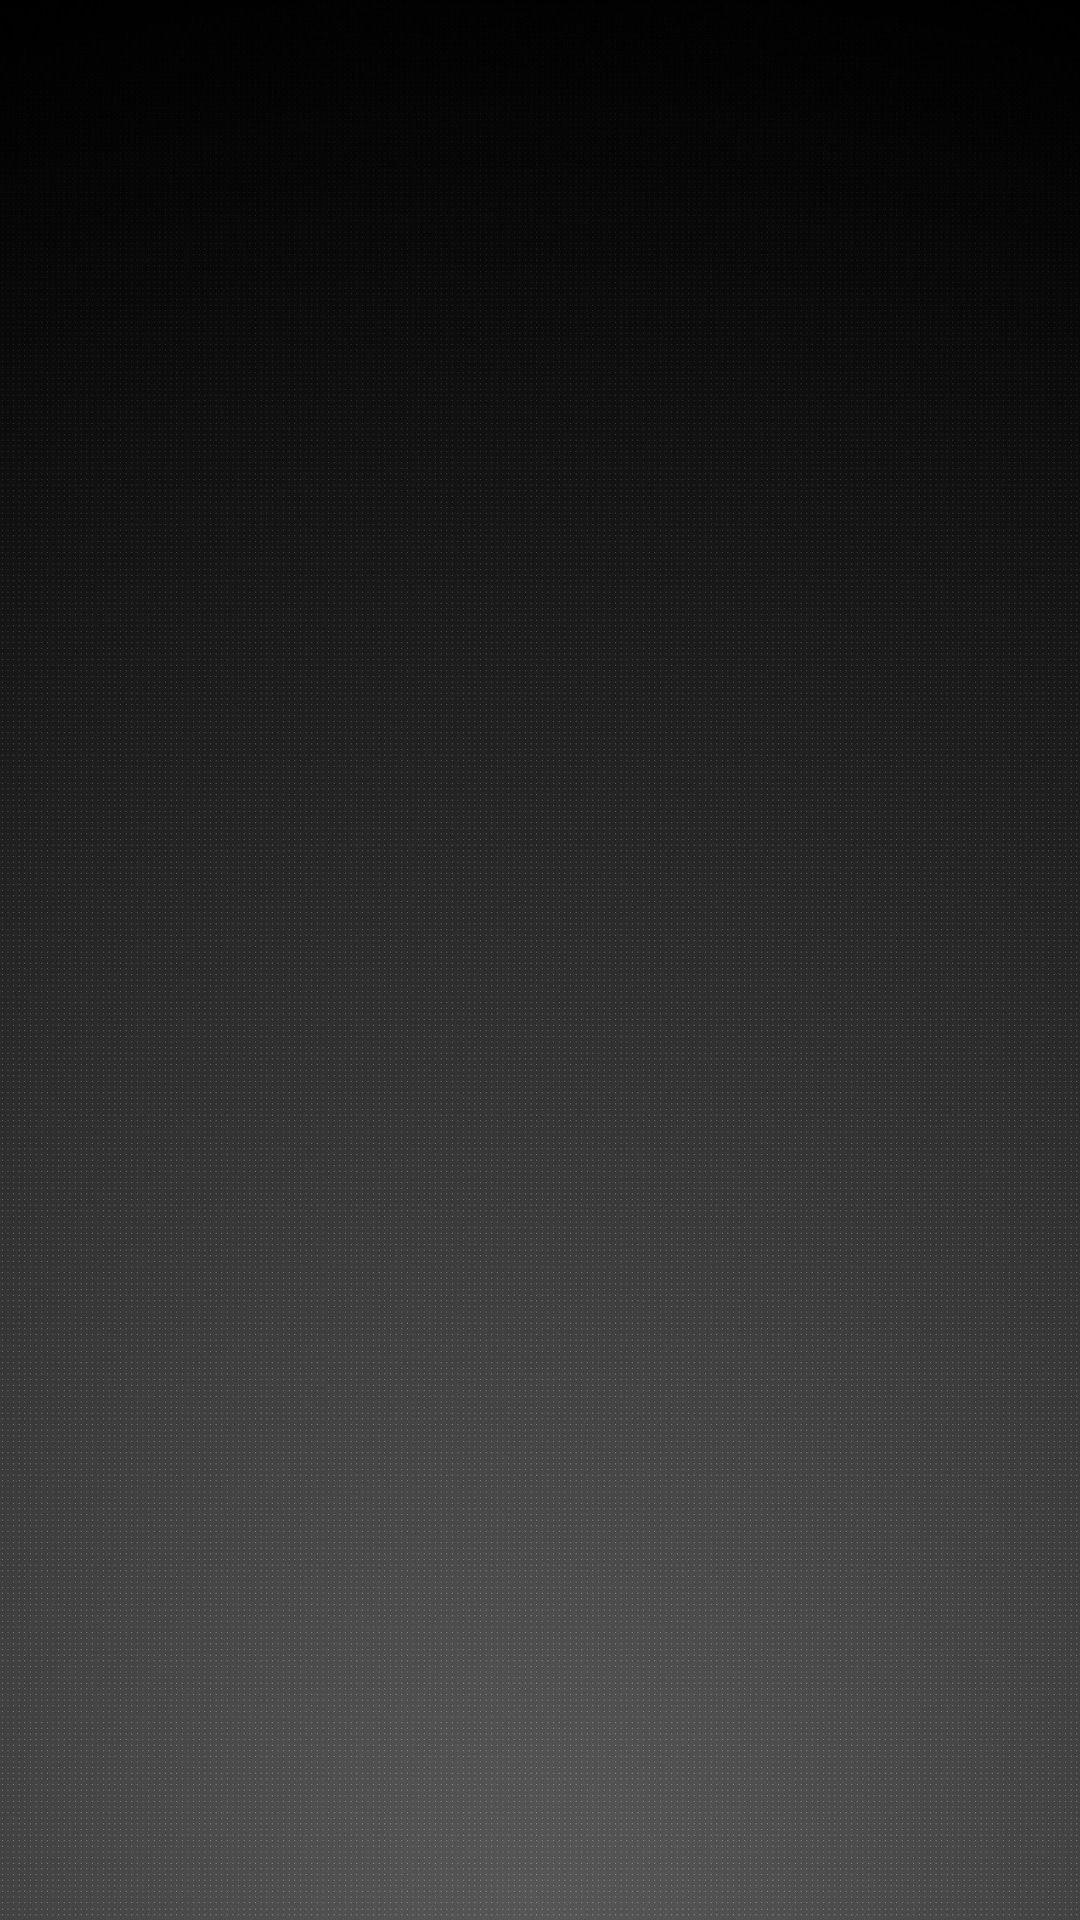 Gray and cool iPhone XS wallpaper. Grey wallpaper